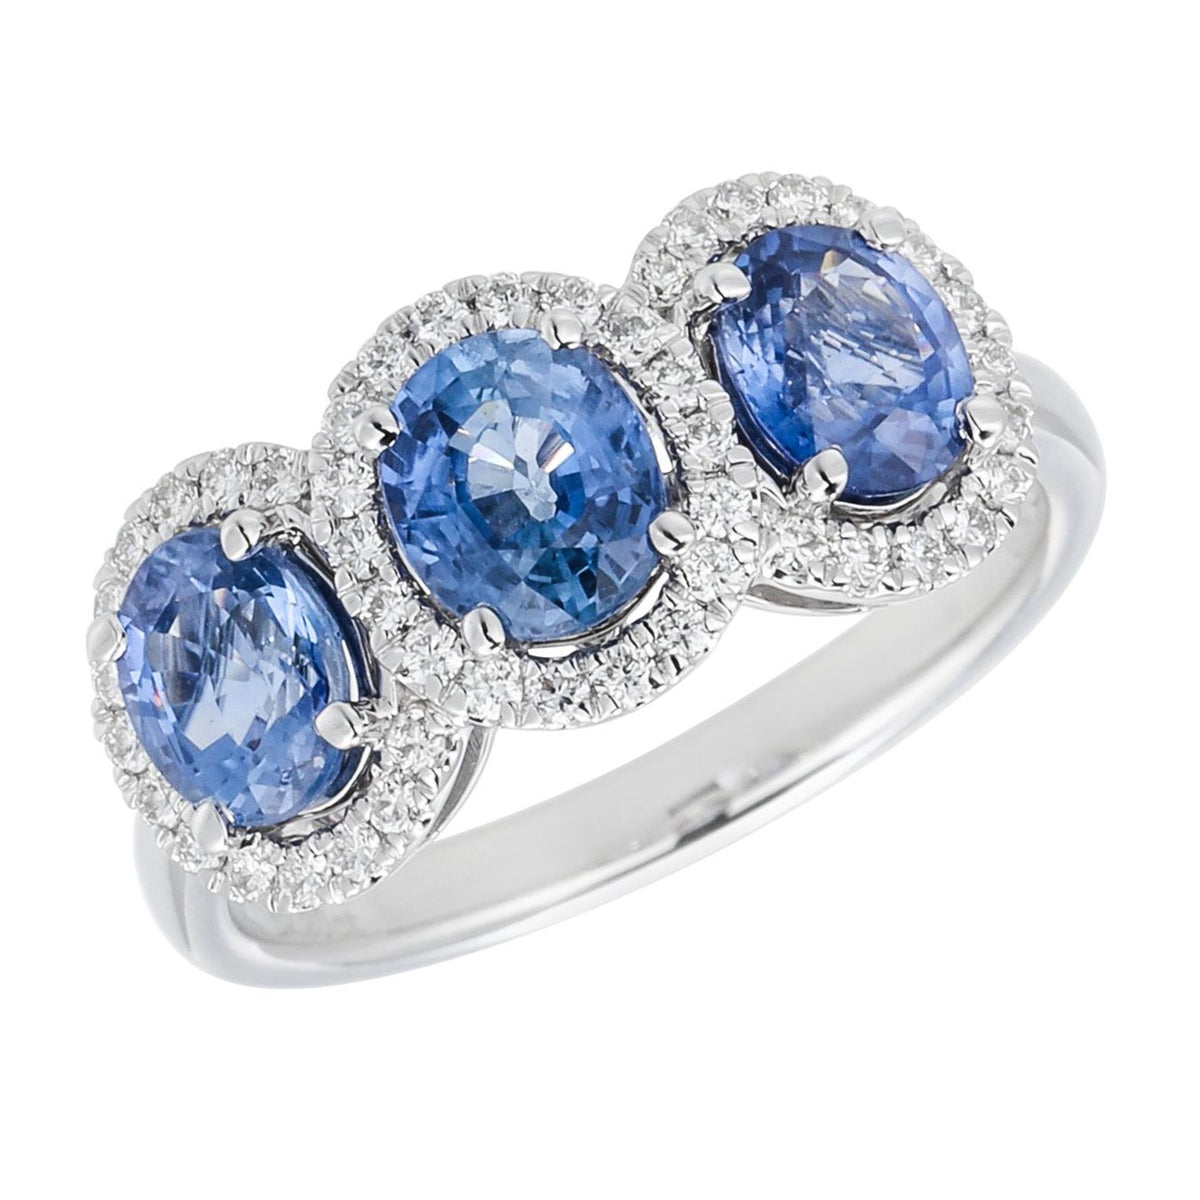 18Kt White Gold 3 Stone Gemstone Ring With 1.69ct Sapphires